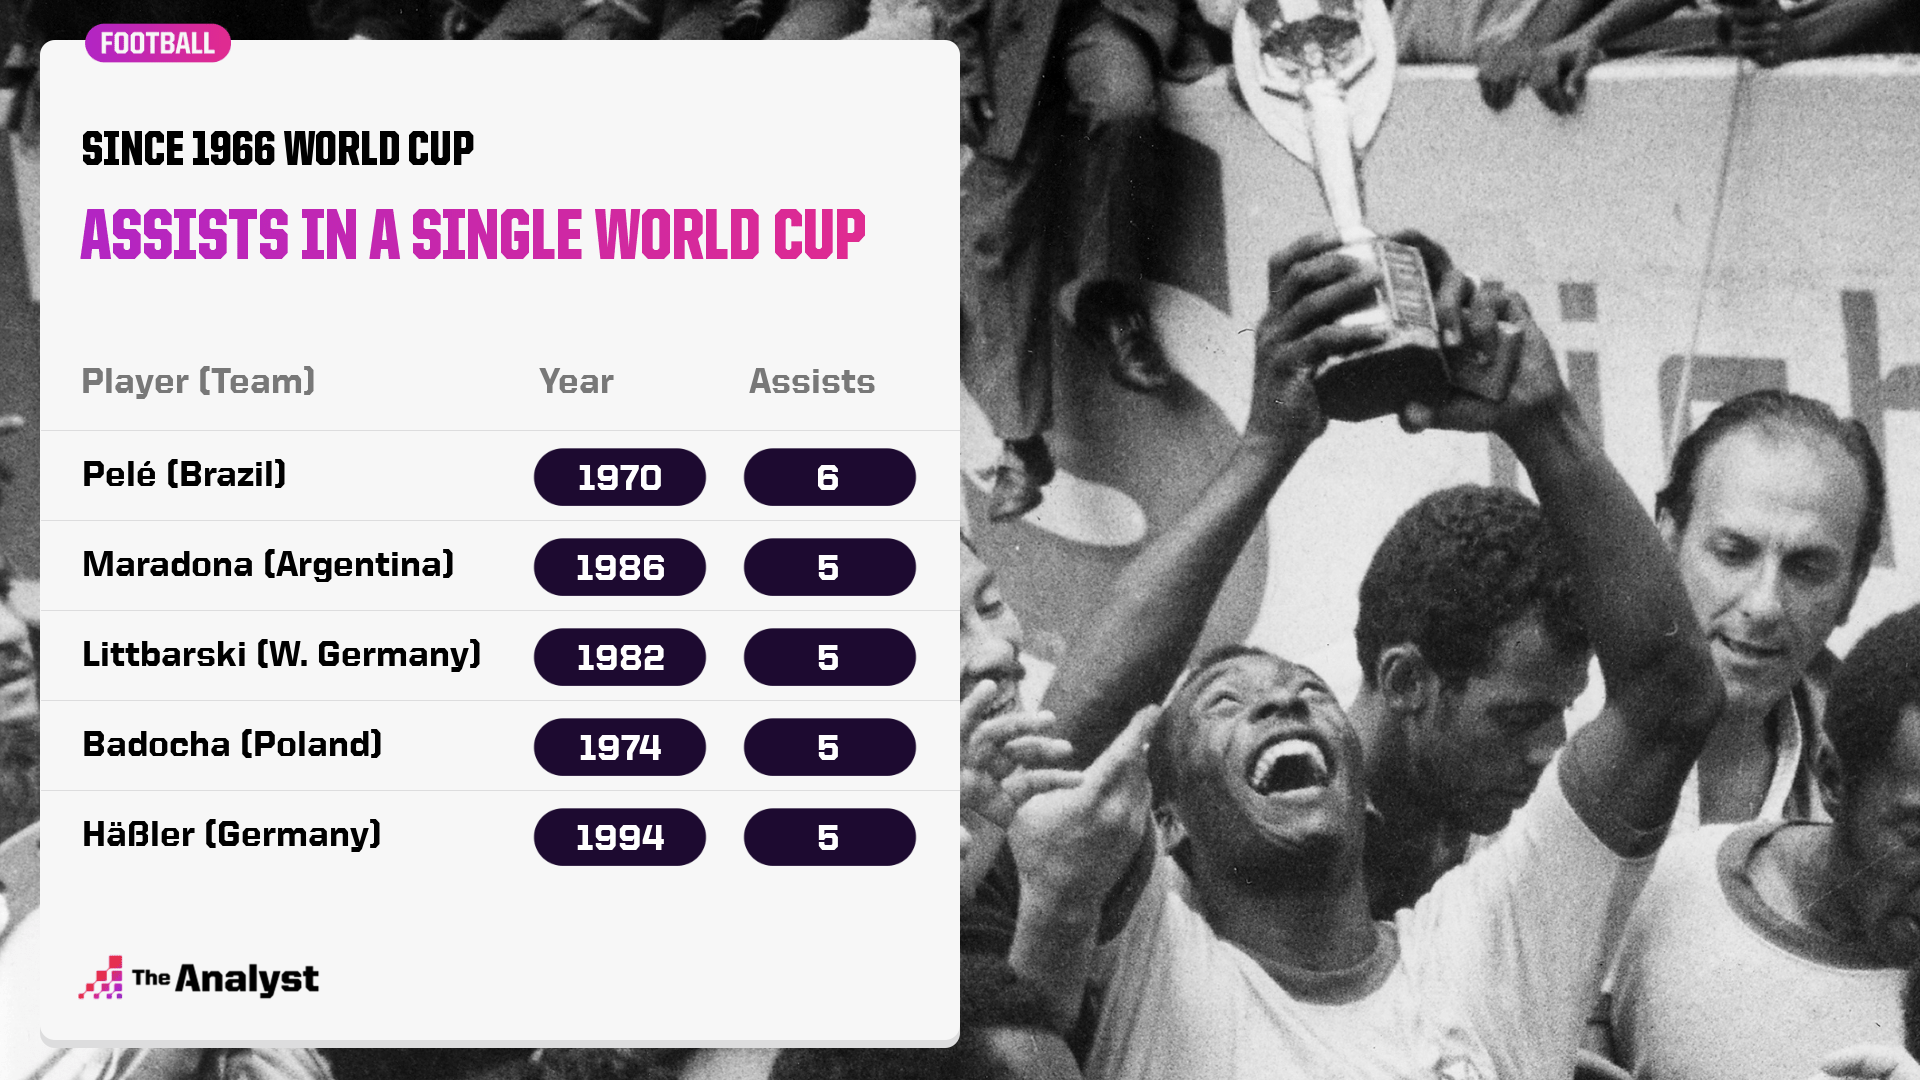 Most assists in a single world cup. Pele made 6 in 1970 for Brazil